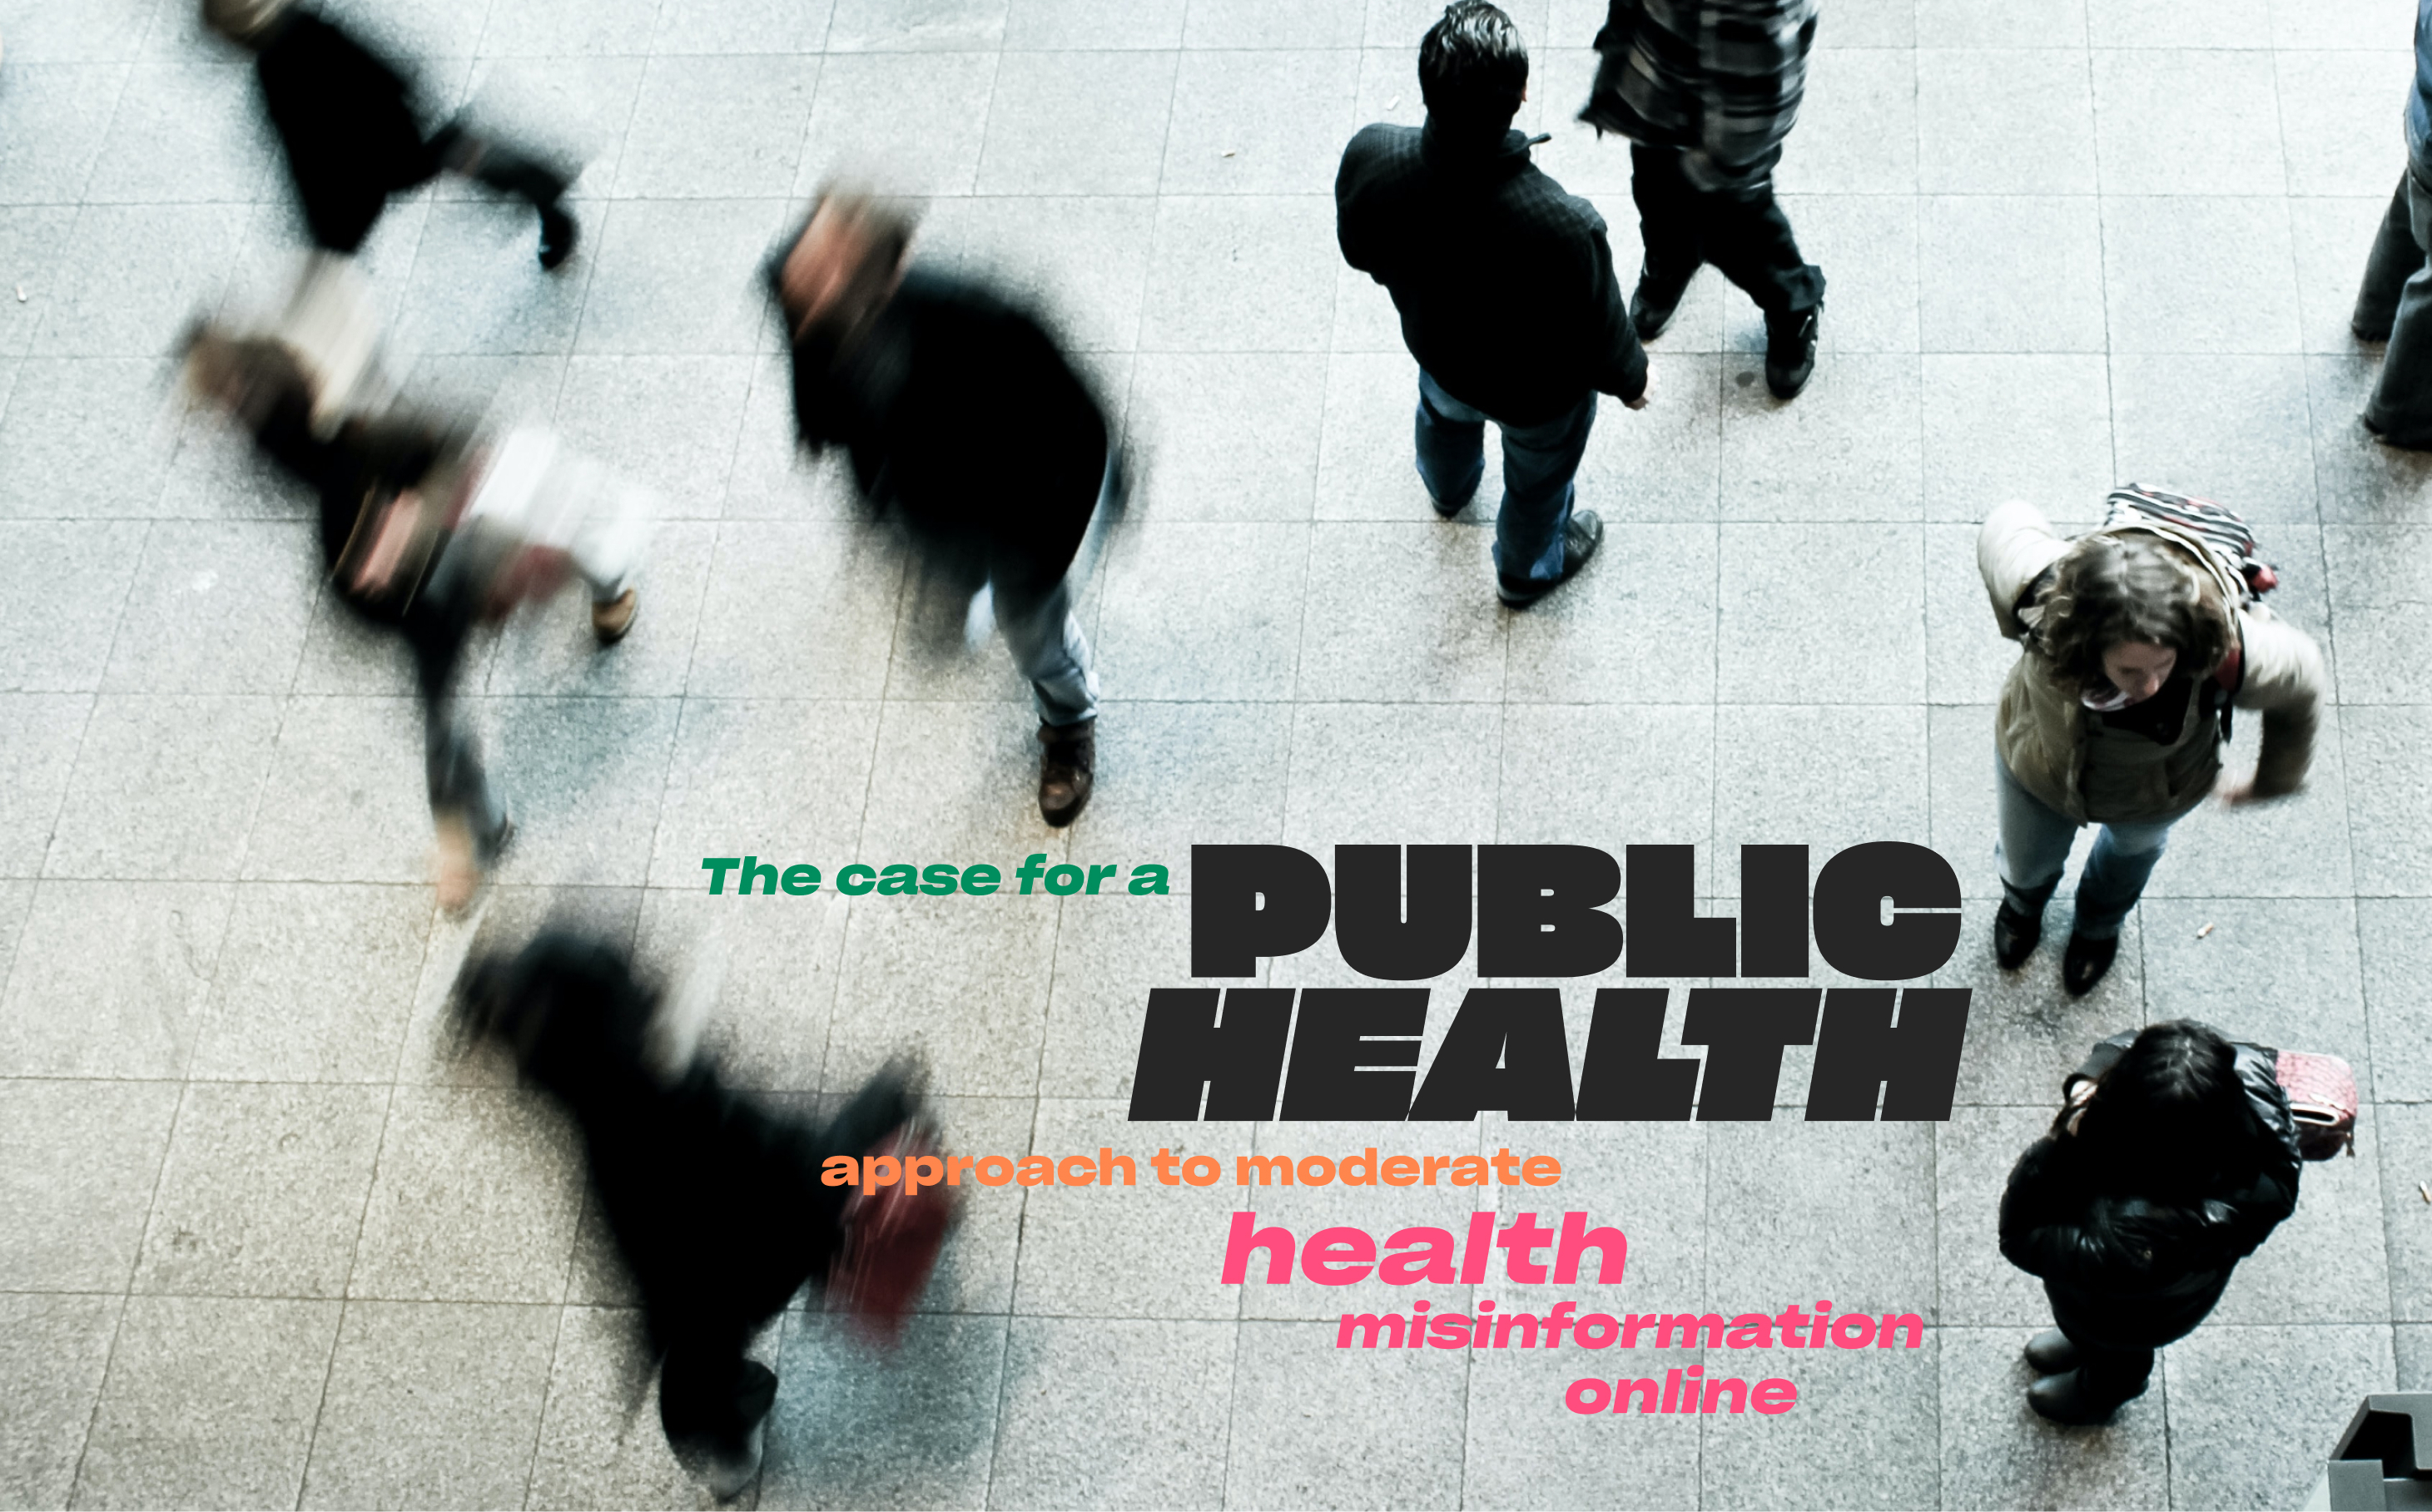 The case for a public health approach...